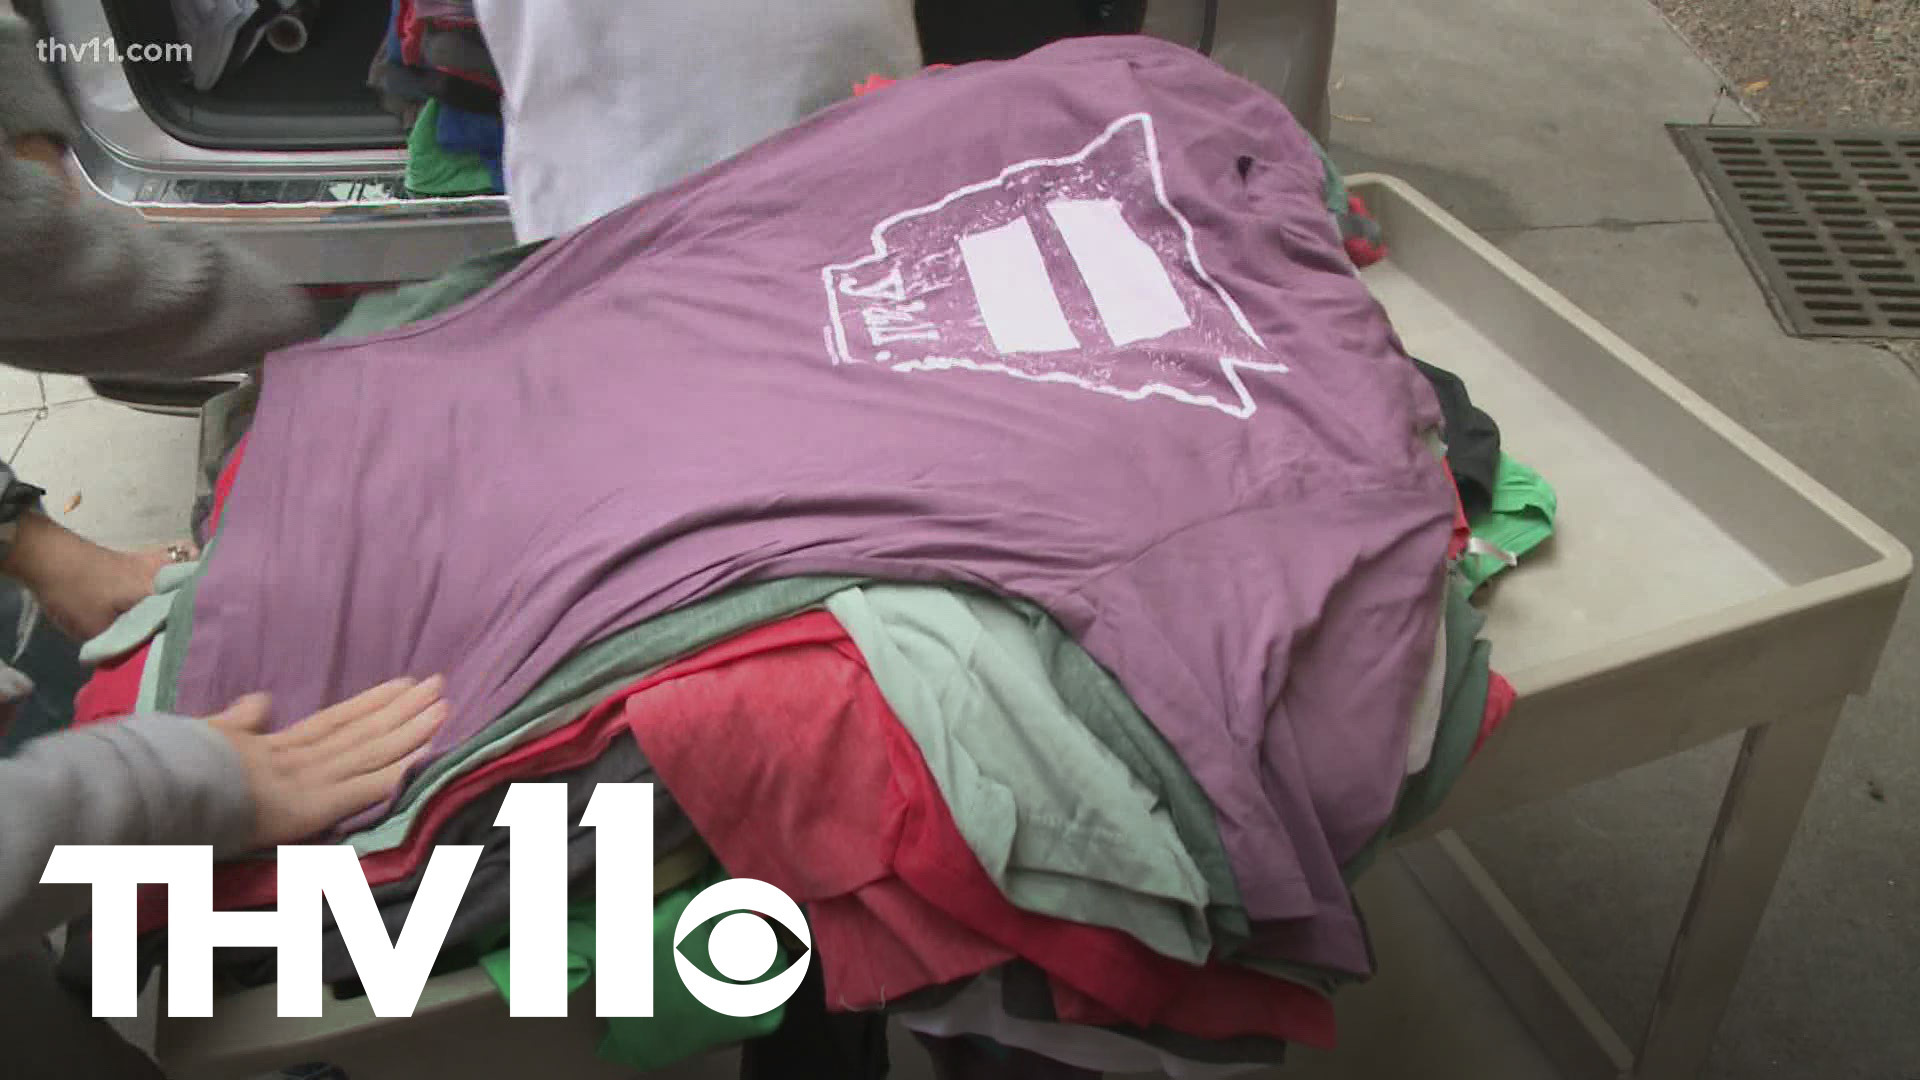 The pandemic continues to take its toll on the Arkansans on the frontline and that's why Hillcrest Waterbugs donated dozens of t-shirts and hats for free.